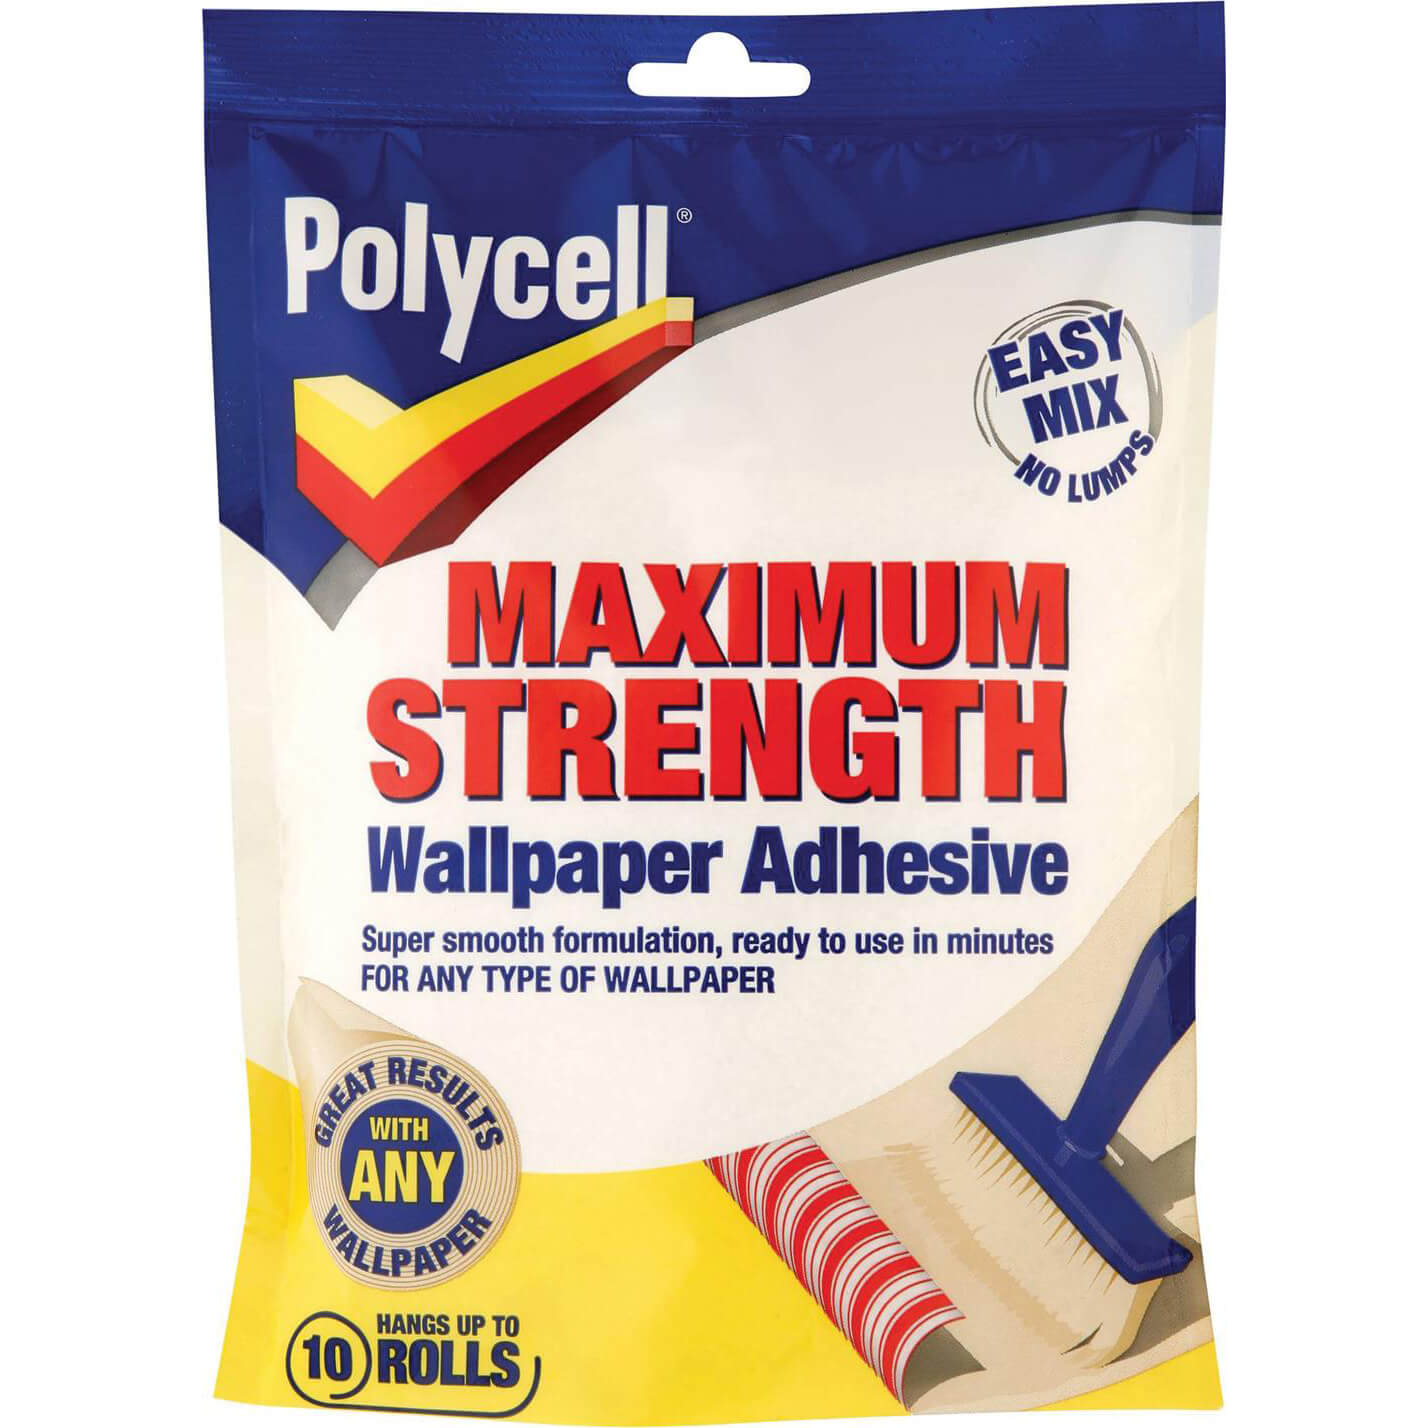 Polycell Maximum Strength Wallpaper Adhesive 10 Roll